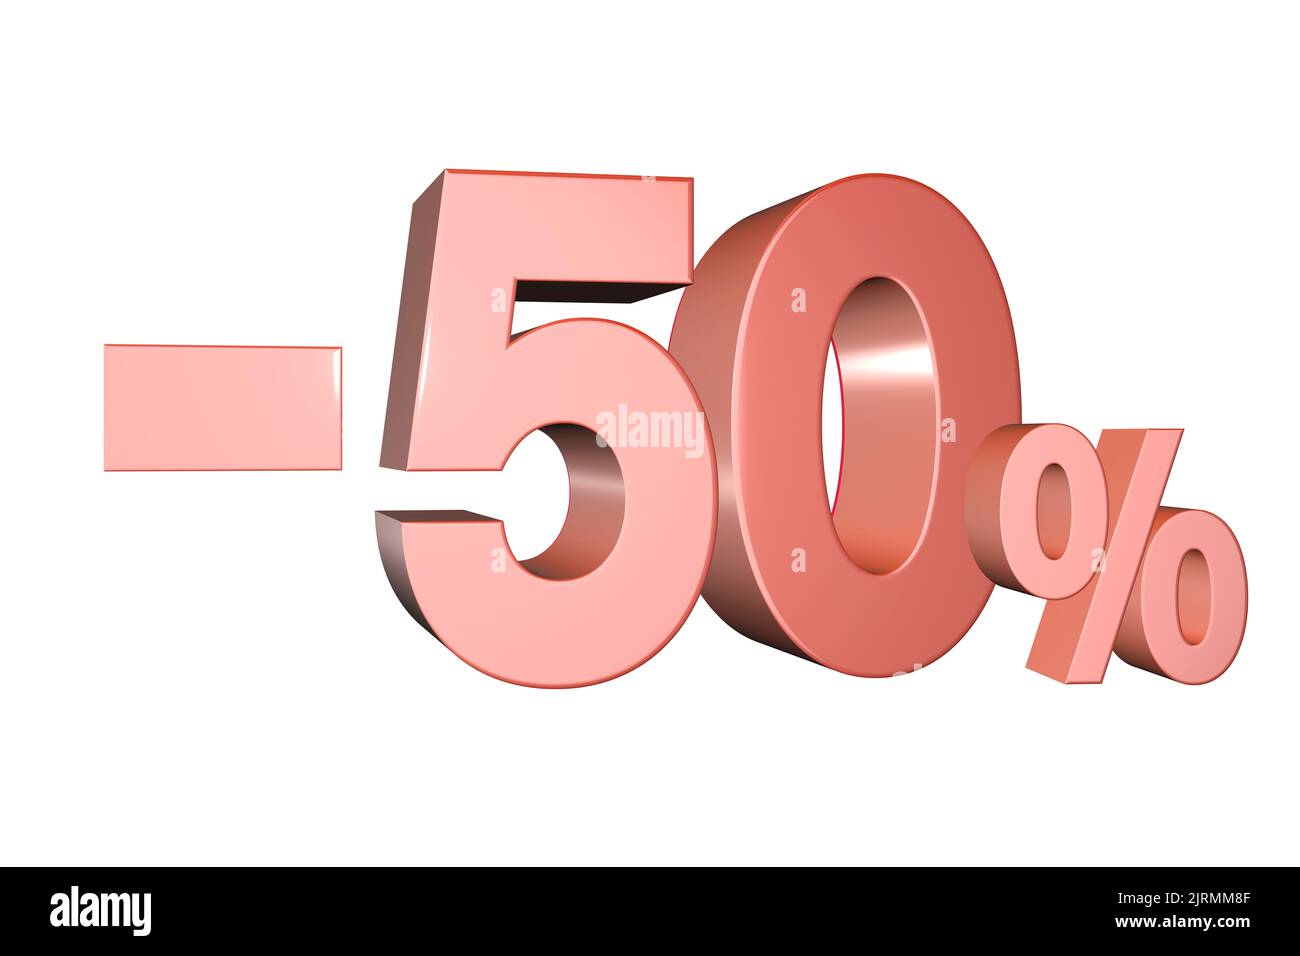 3D rendered discount banner marketing sign showing minus - 50% percent off Stock Photo